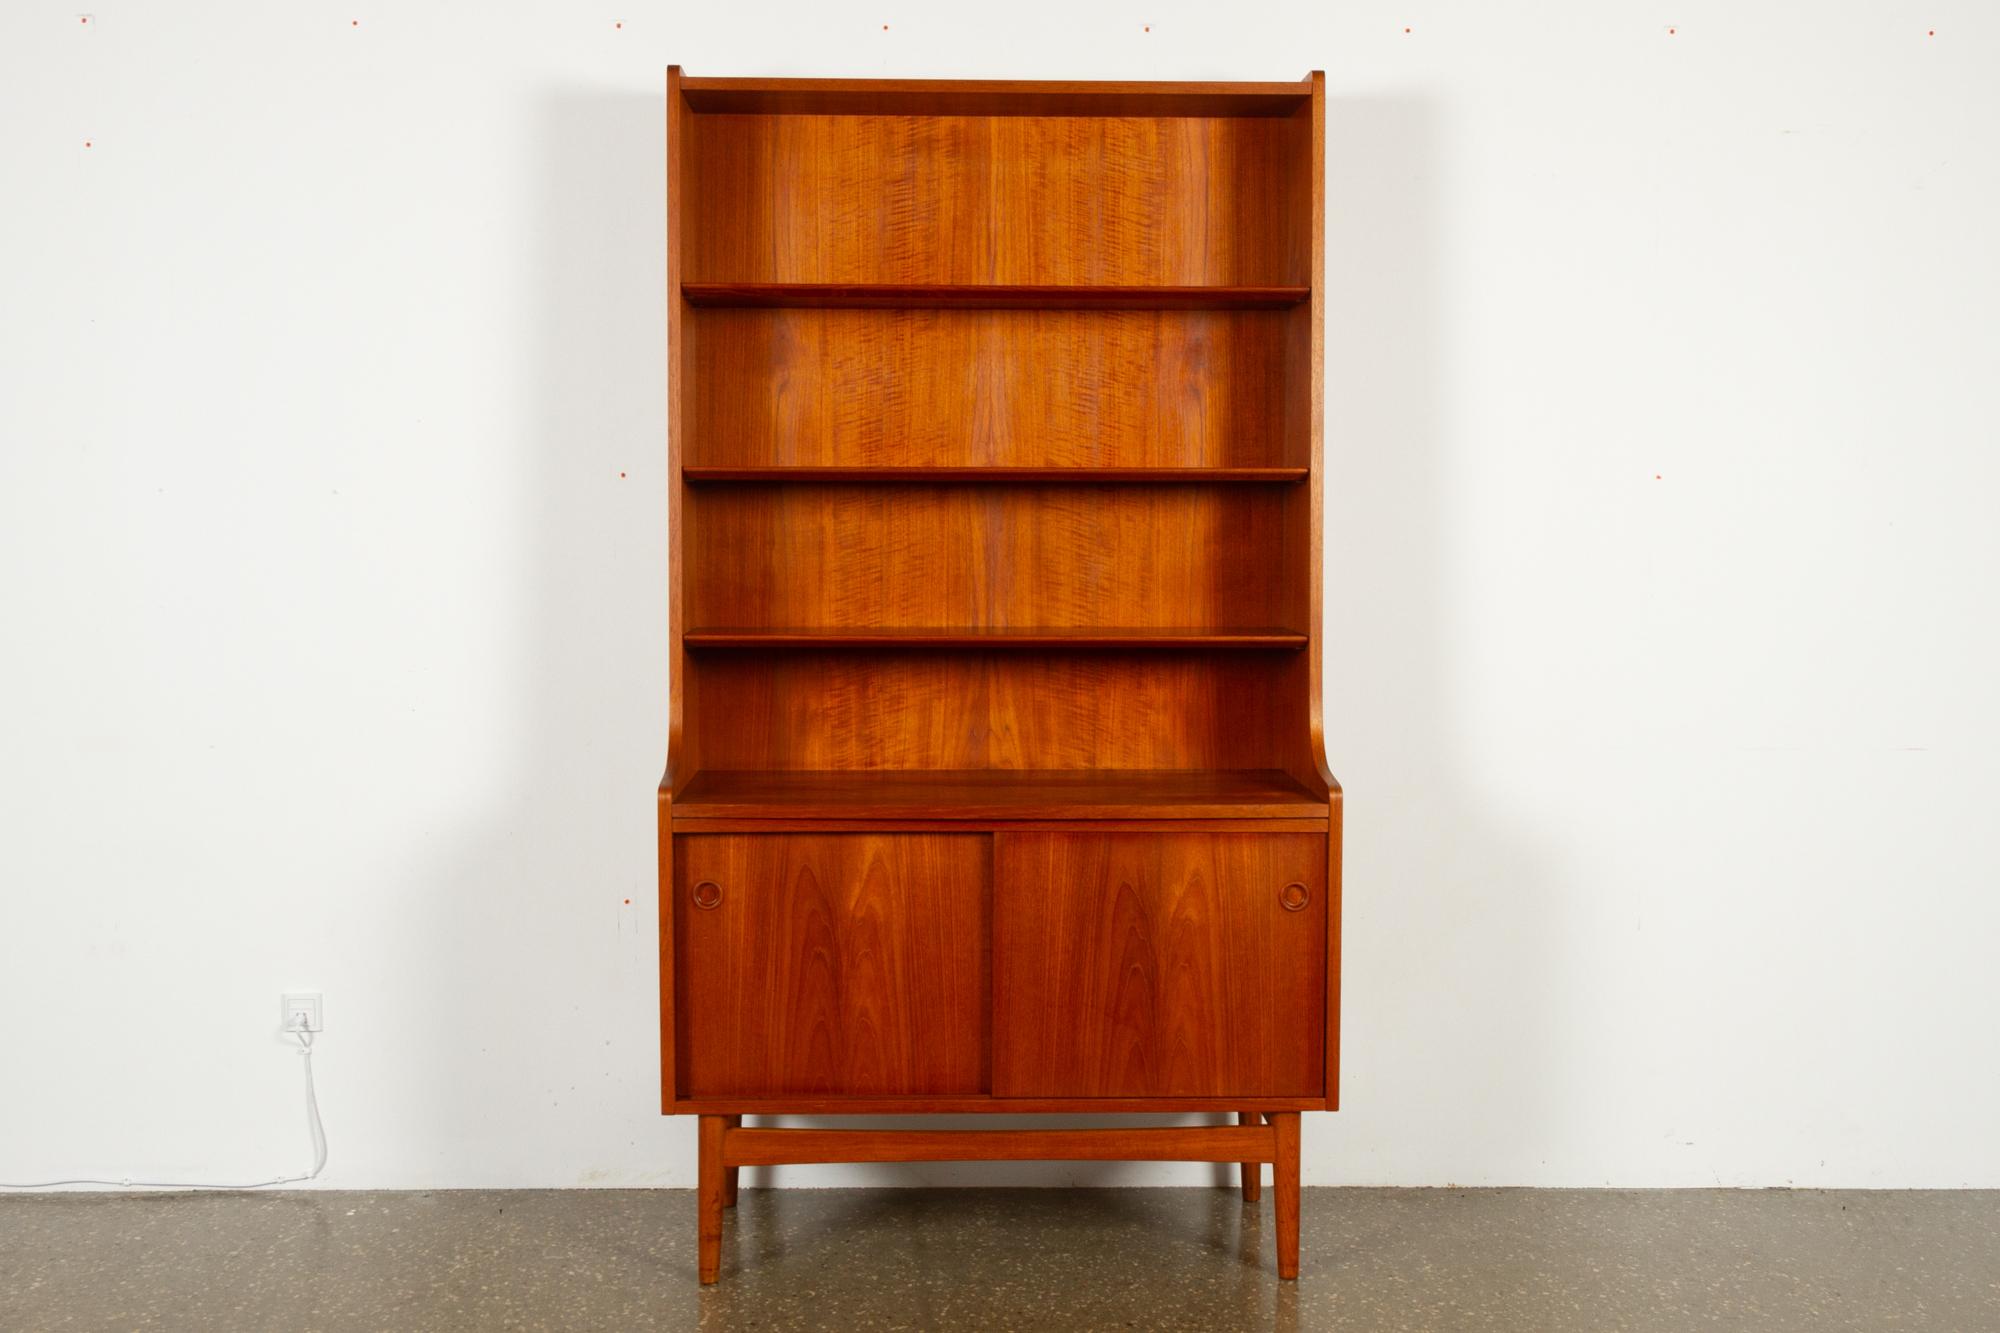 Mid-Century Modern Danish teak bookcase, 1960s
This Classic Scandinavian bookcase was designed by Danish master carpenter Johannes Sorth for Nexø Møbelfabrik, Bornholm in 1956. The idea was to combine a cabinet and a book case, and it was an